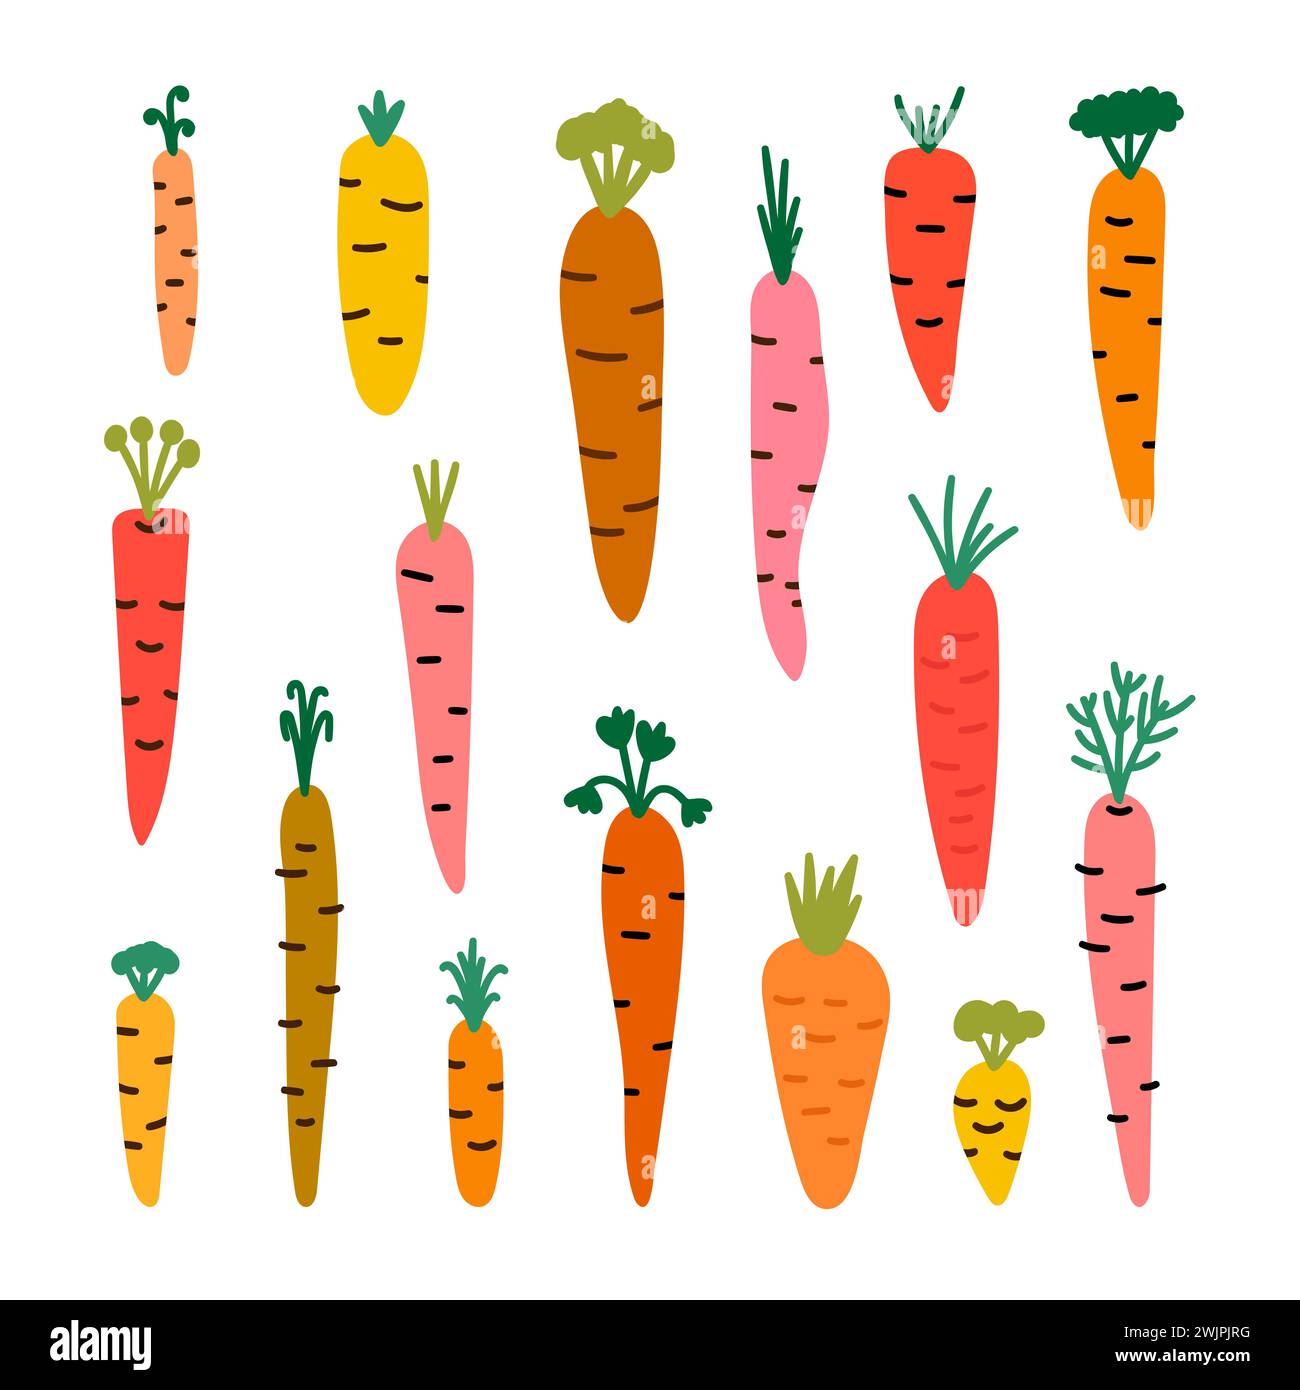 Carrot root vegetable cartoon illustration Cut Out Stock Images & Pictures  - Page 3 - Alamy